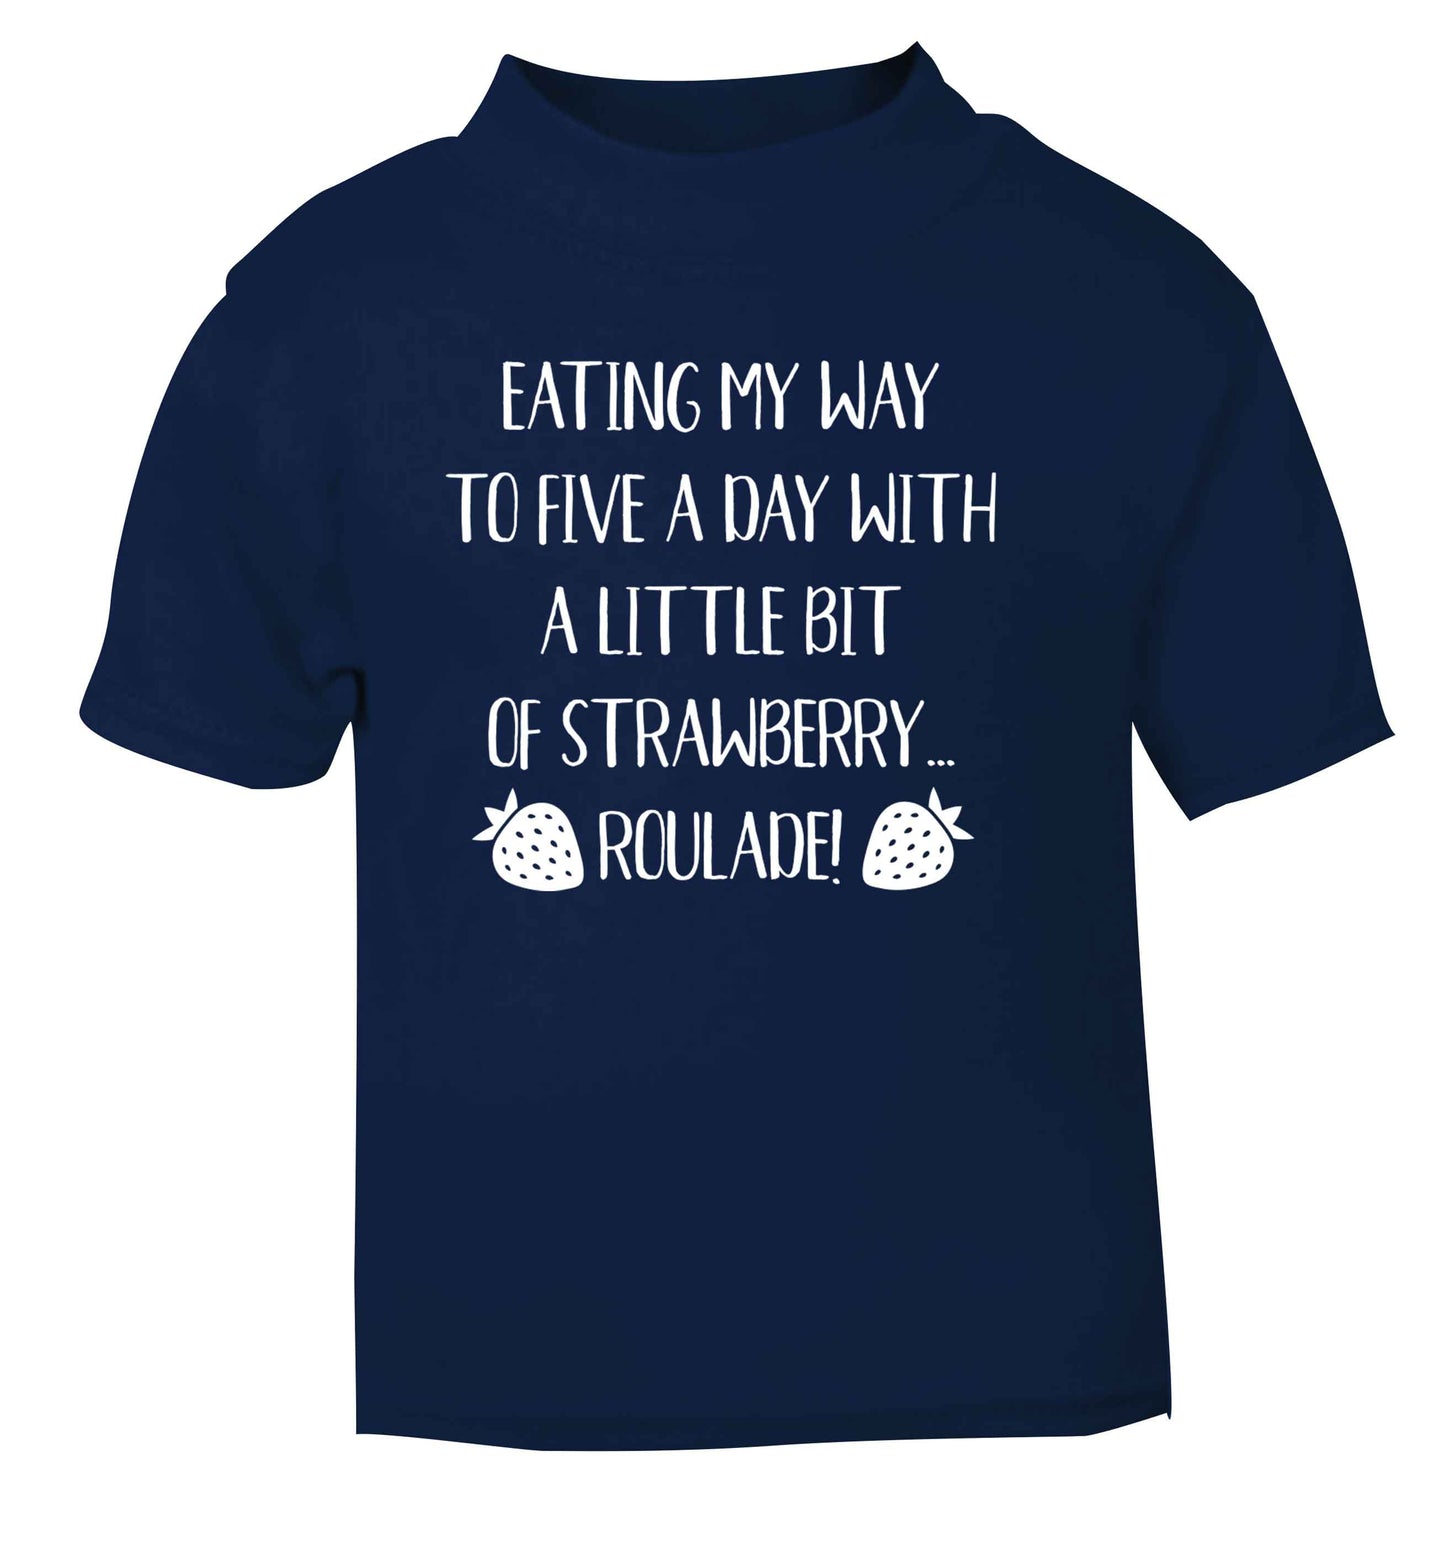 Eating my way to five a day with a little bit of strawberry roulade navy Baby Toddler Tshirt 2 Years